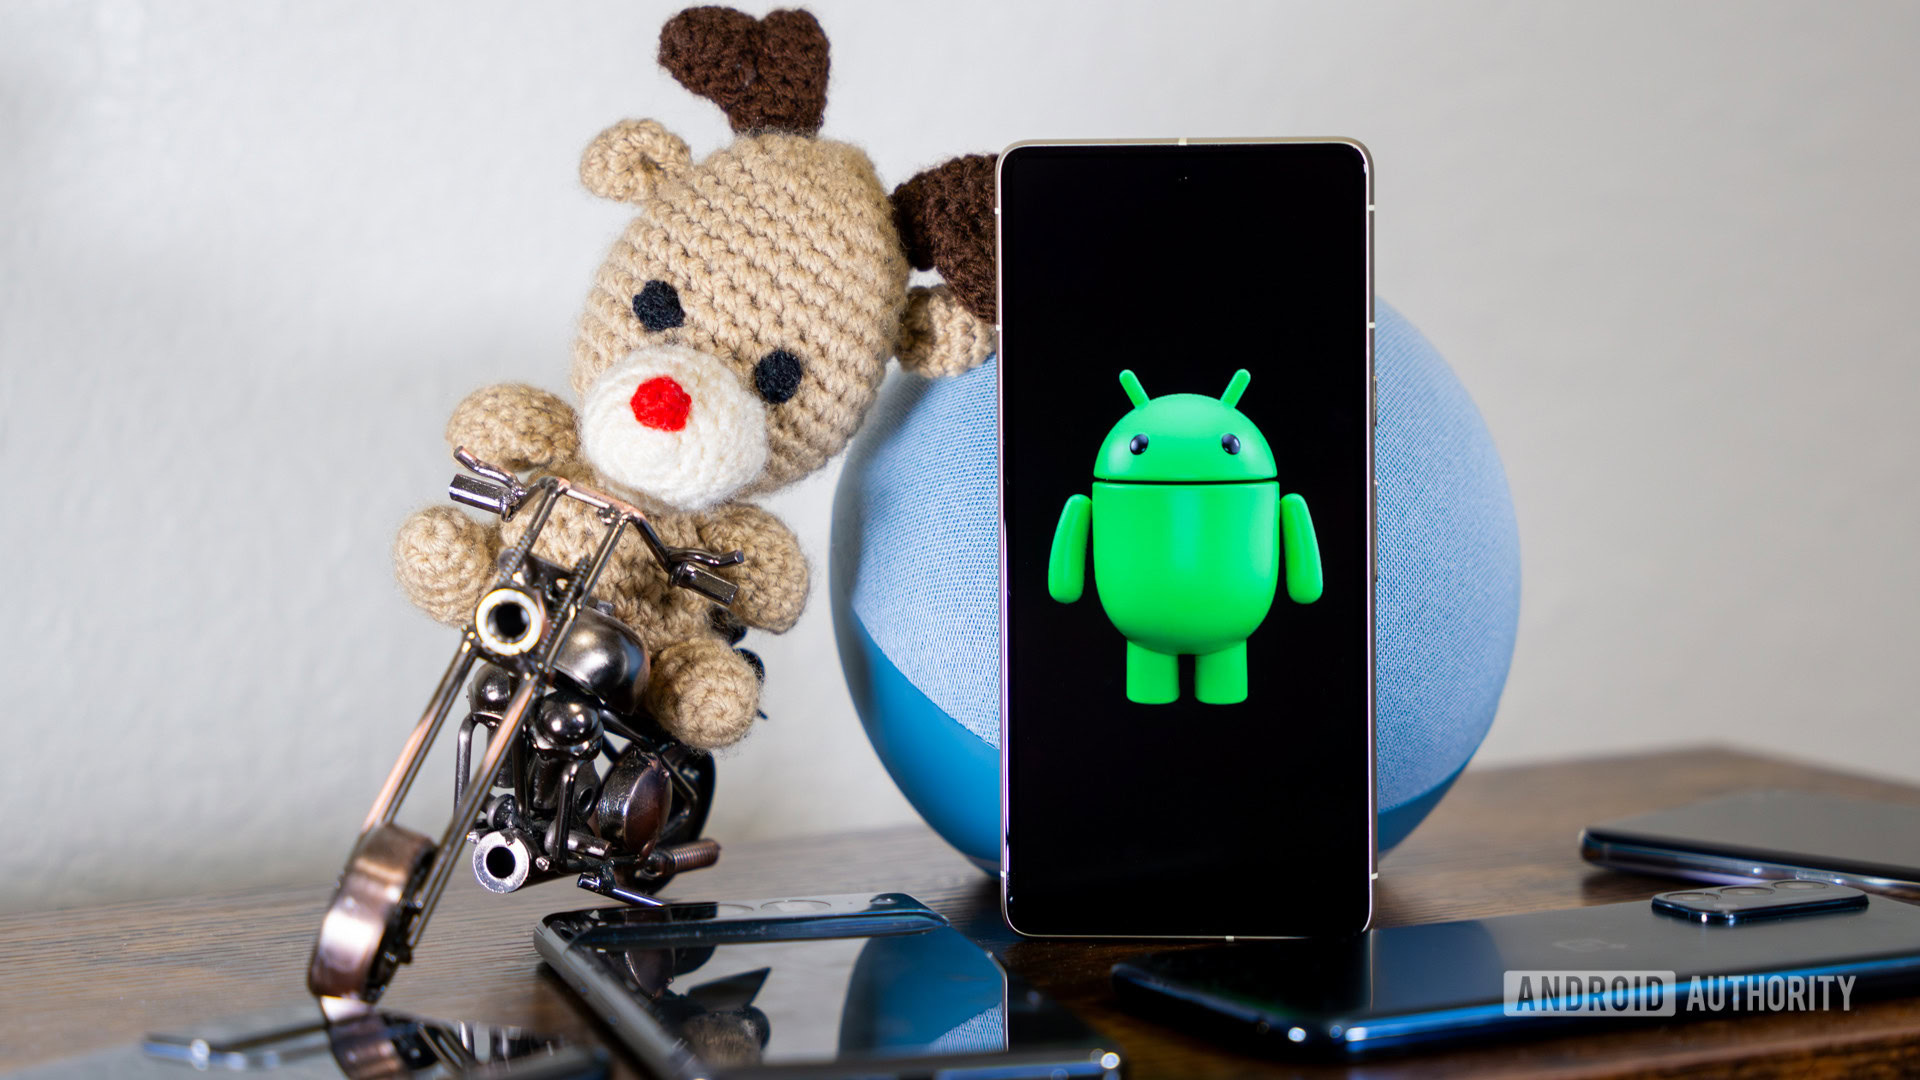 Android robot on smartphone next to other devices and accessories (1)